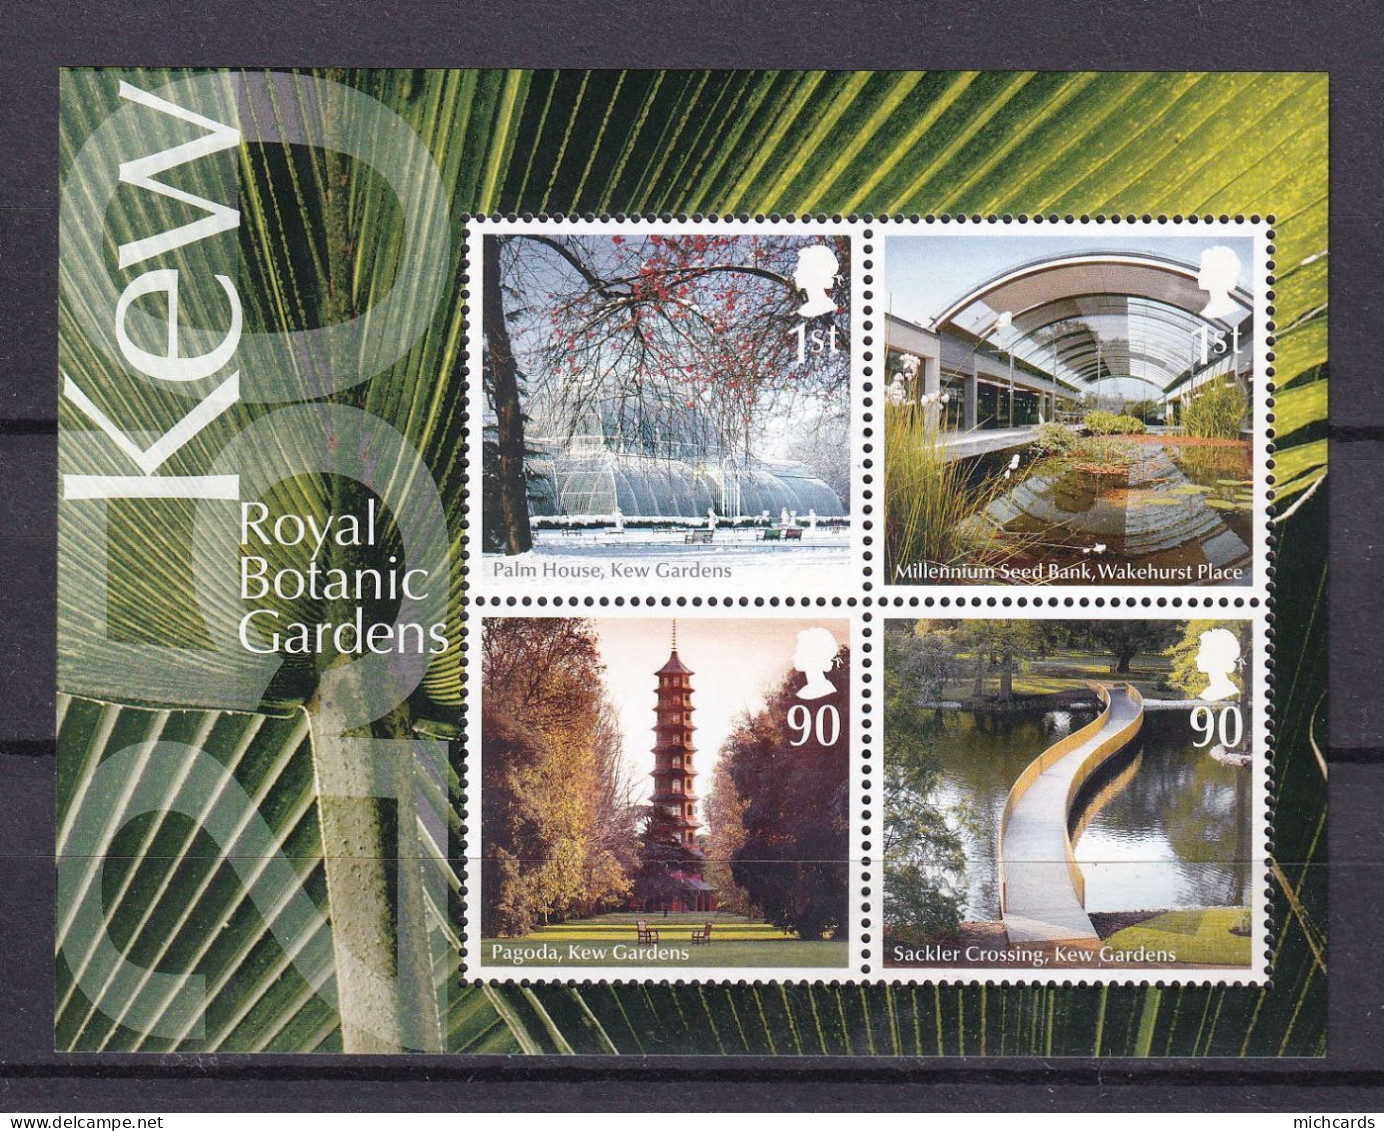 195 GRANDE BRETAGNE 2009 - Y&T BF 65 - Jardin Kew Serre Aux Palmiers Pagode Passerelle - Neuf ** (MNH) Sans Charniere - Unused Stamps